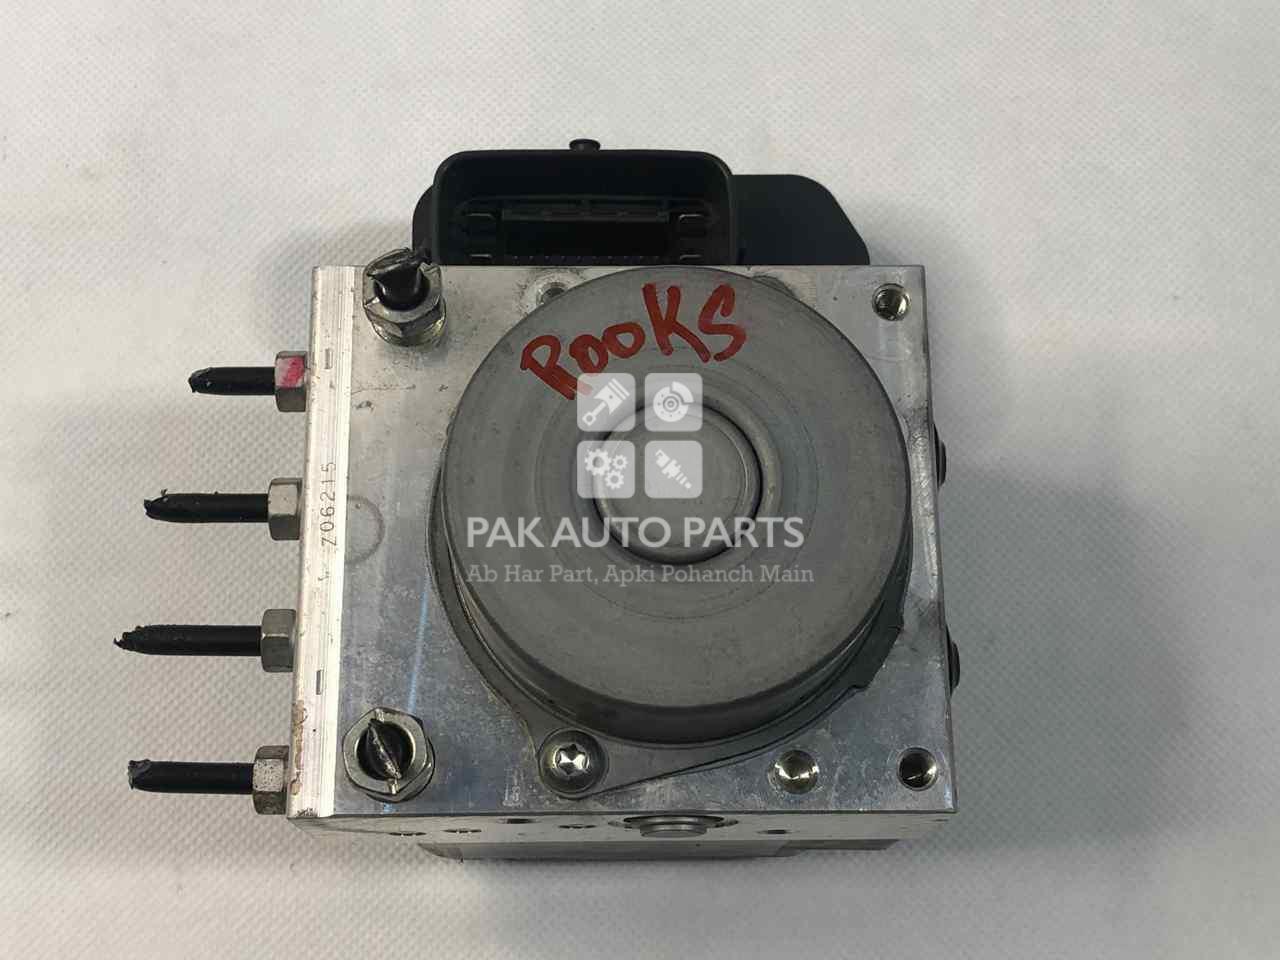 Picture of NIssan Dayz Roox 2013-14 ABS Unit